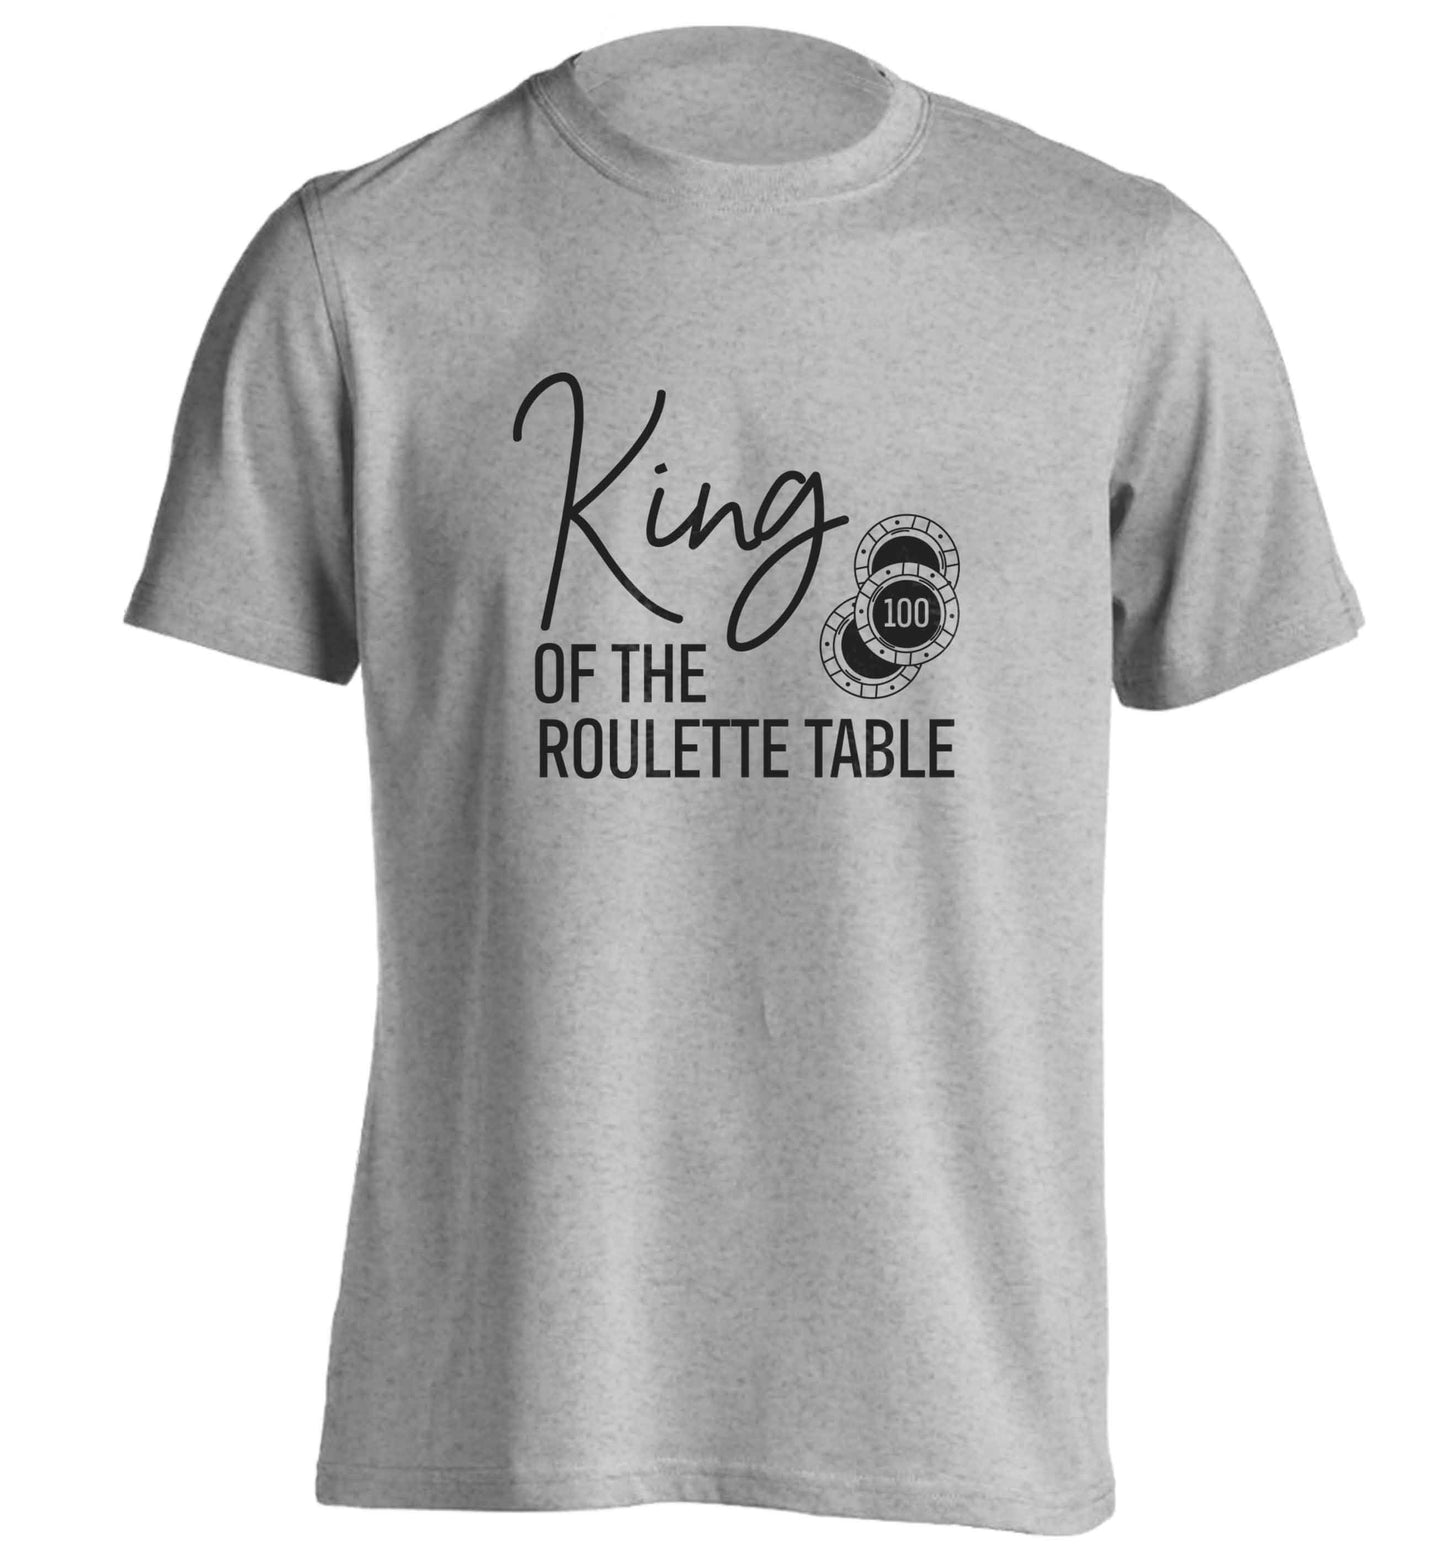 King of the roulette table adults unisex grey Tshirt 2XL